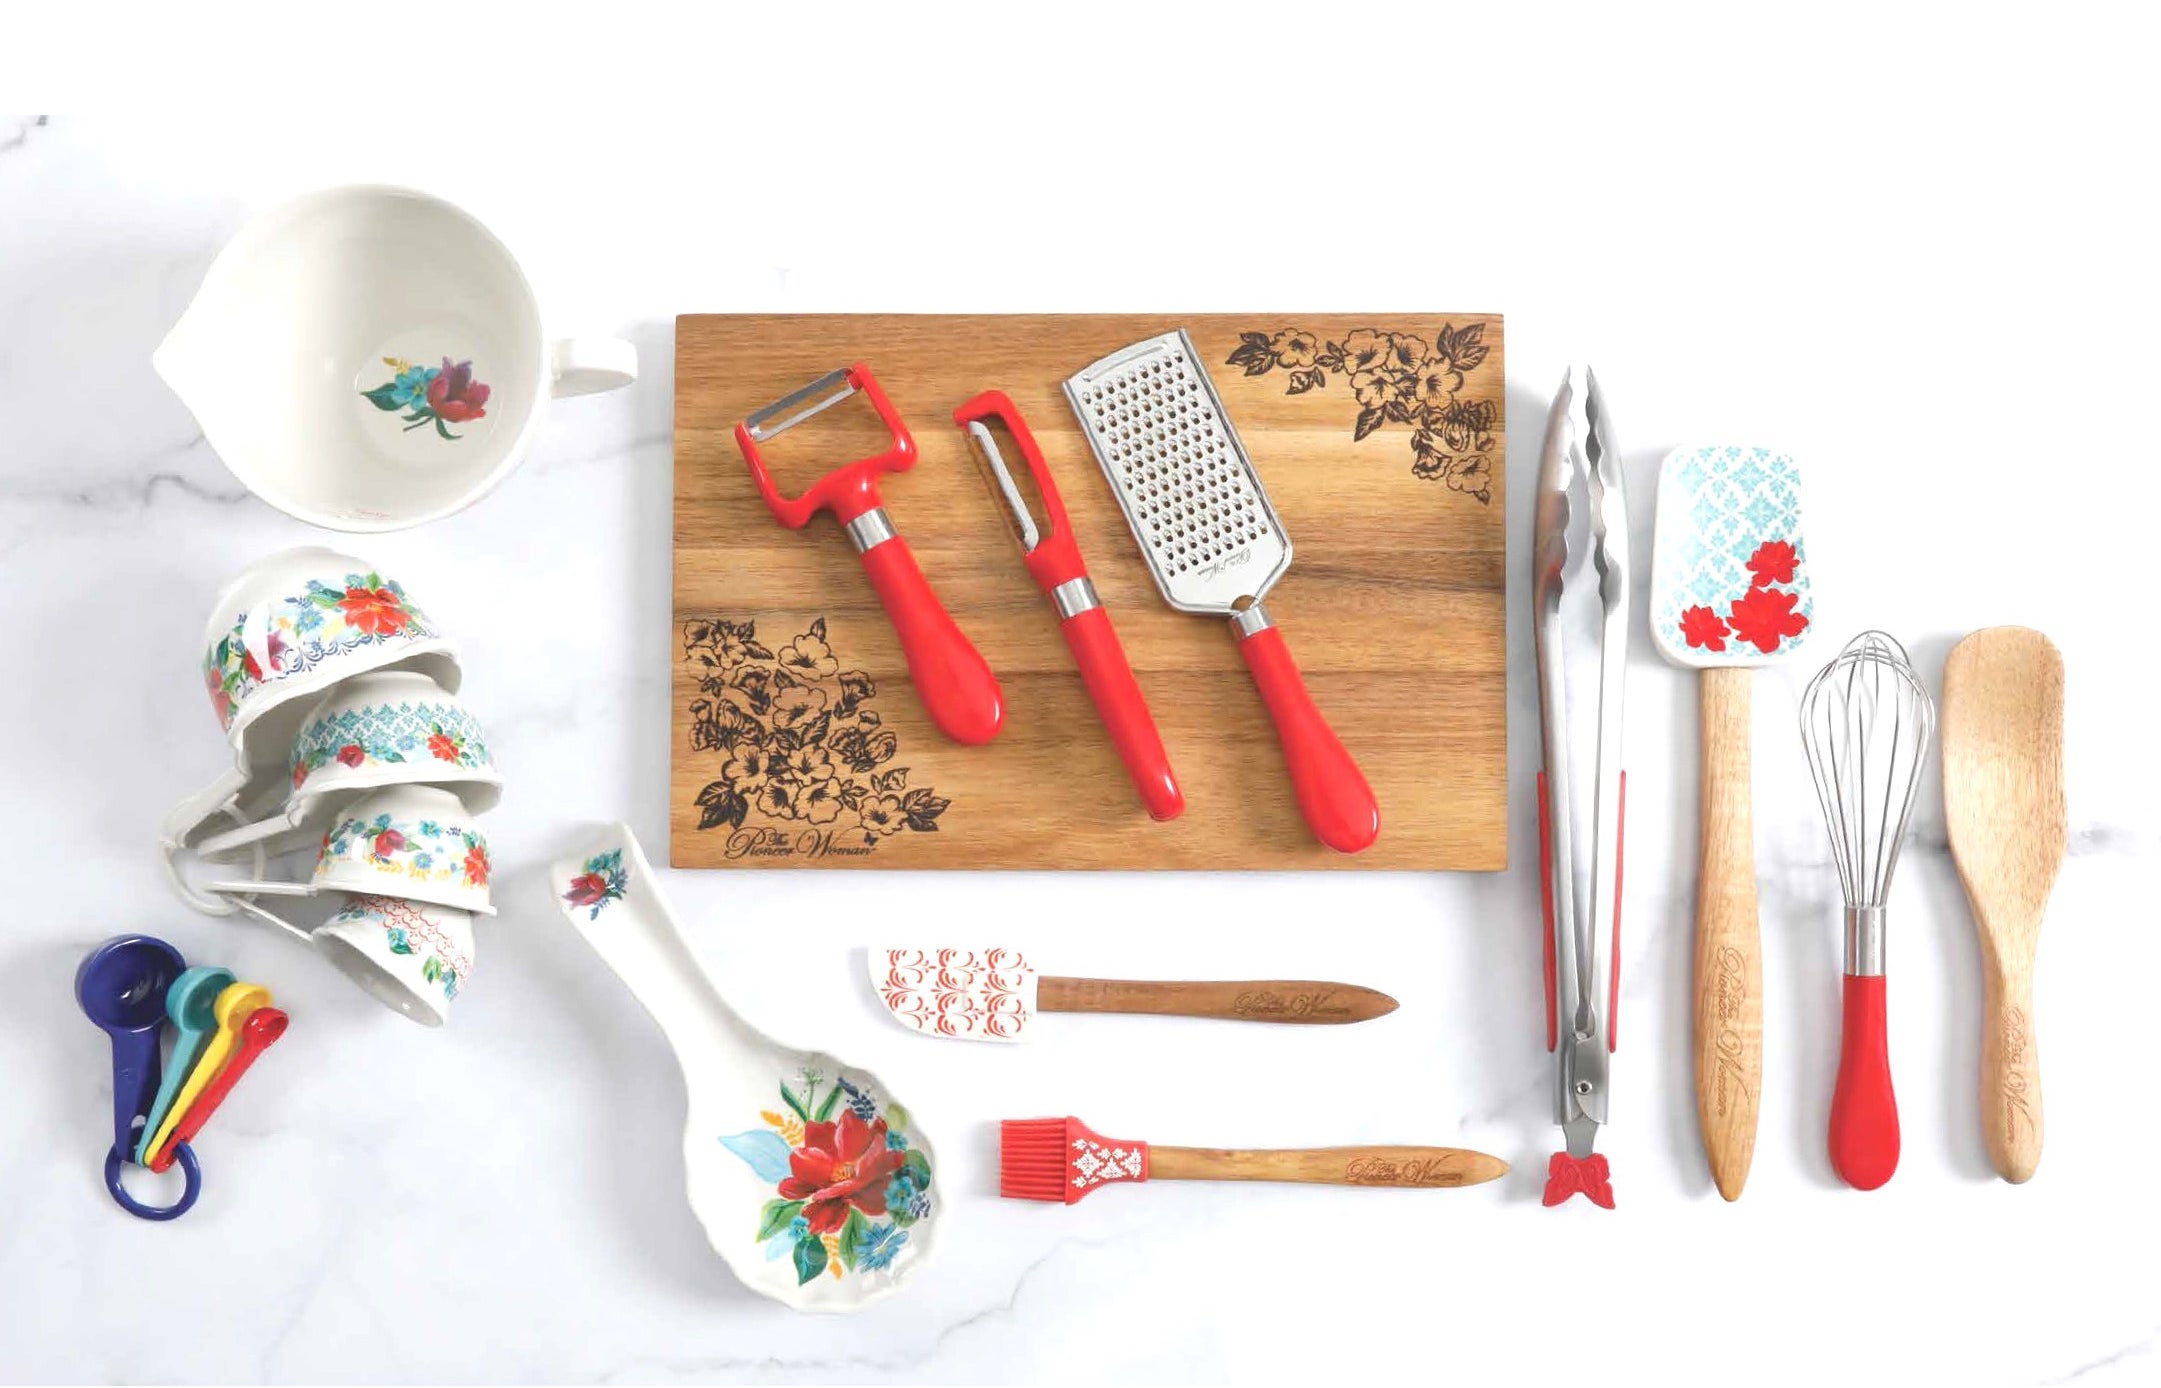 floral utensil set including measuring spoons, spatula, whisk, tongs, peelers, grater, and more